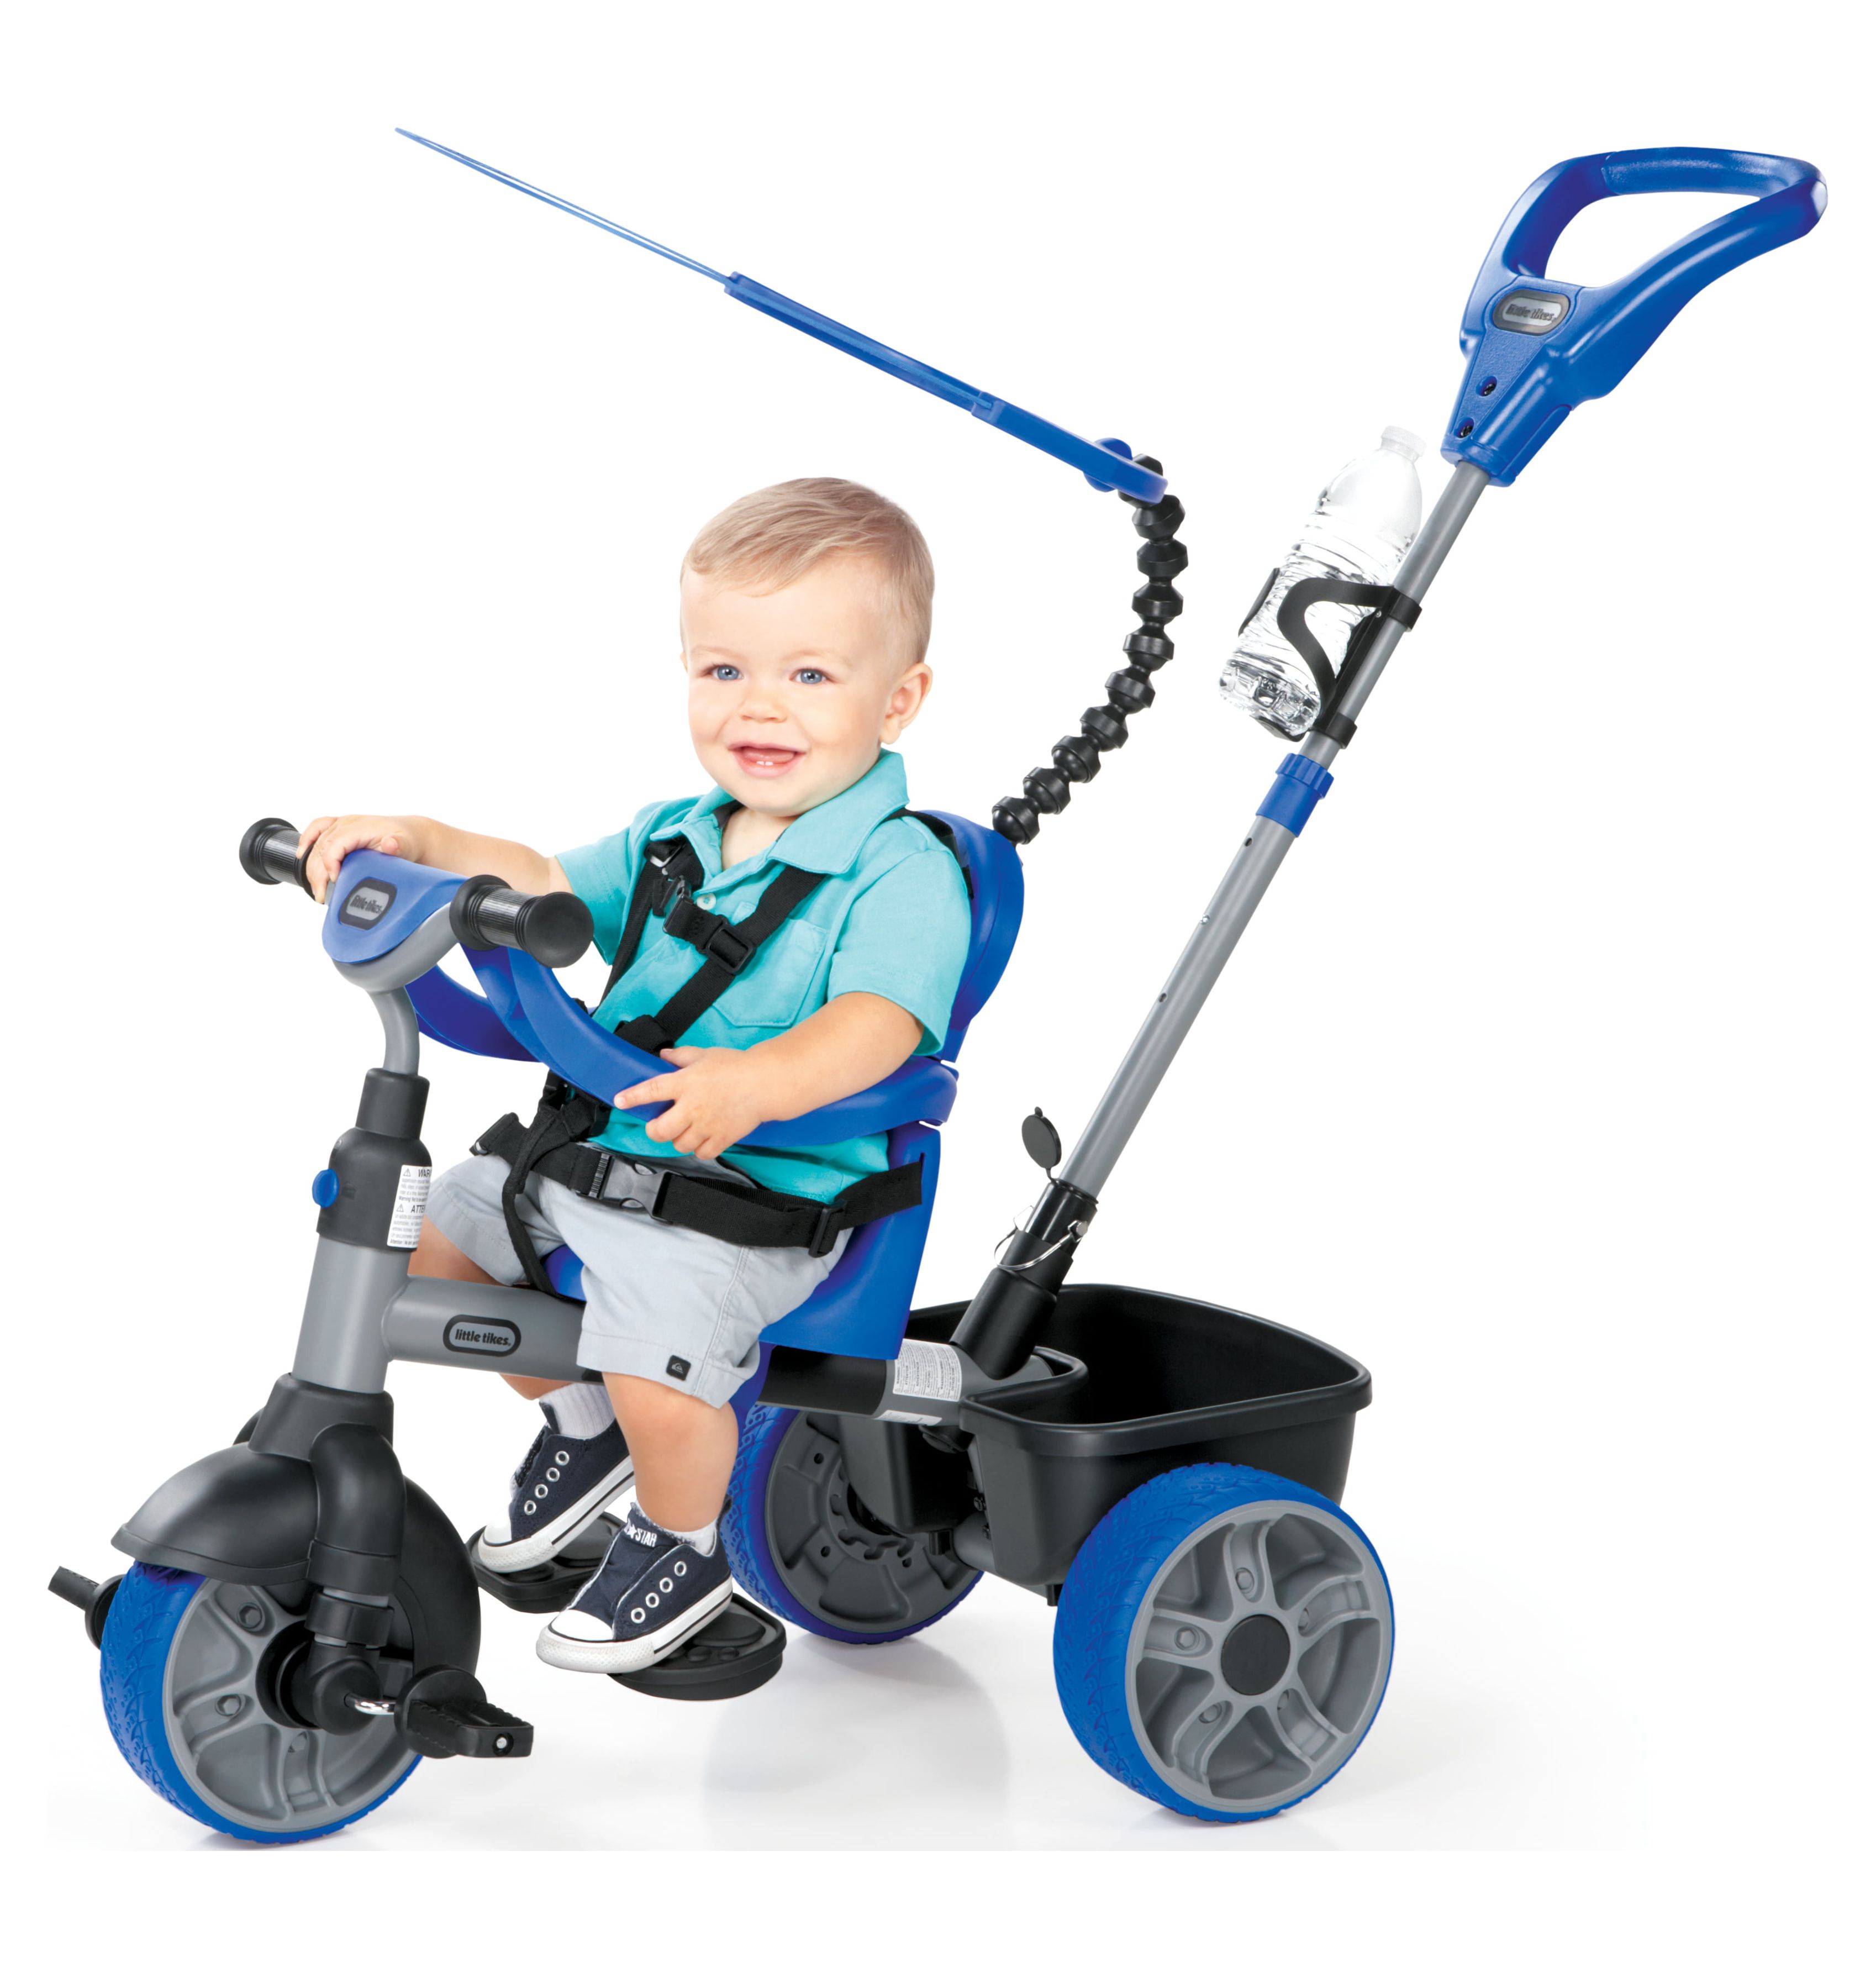 Little Tikes 4-in-1 Basic Edition Trike in Blue, Convertible Tricycle for Toddlers Tricycle with 4 Stages of Growth and Shade Canopy- For Kids Kids Boys Girls Ages 9 Months to 3 Years Old - image 3 of 8